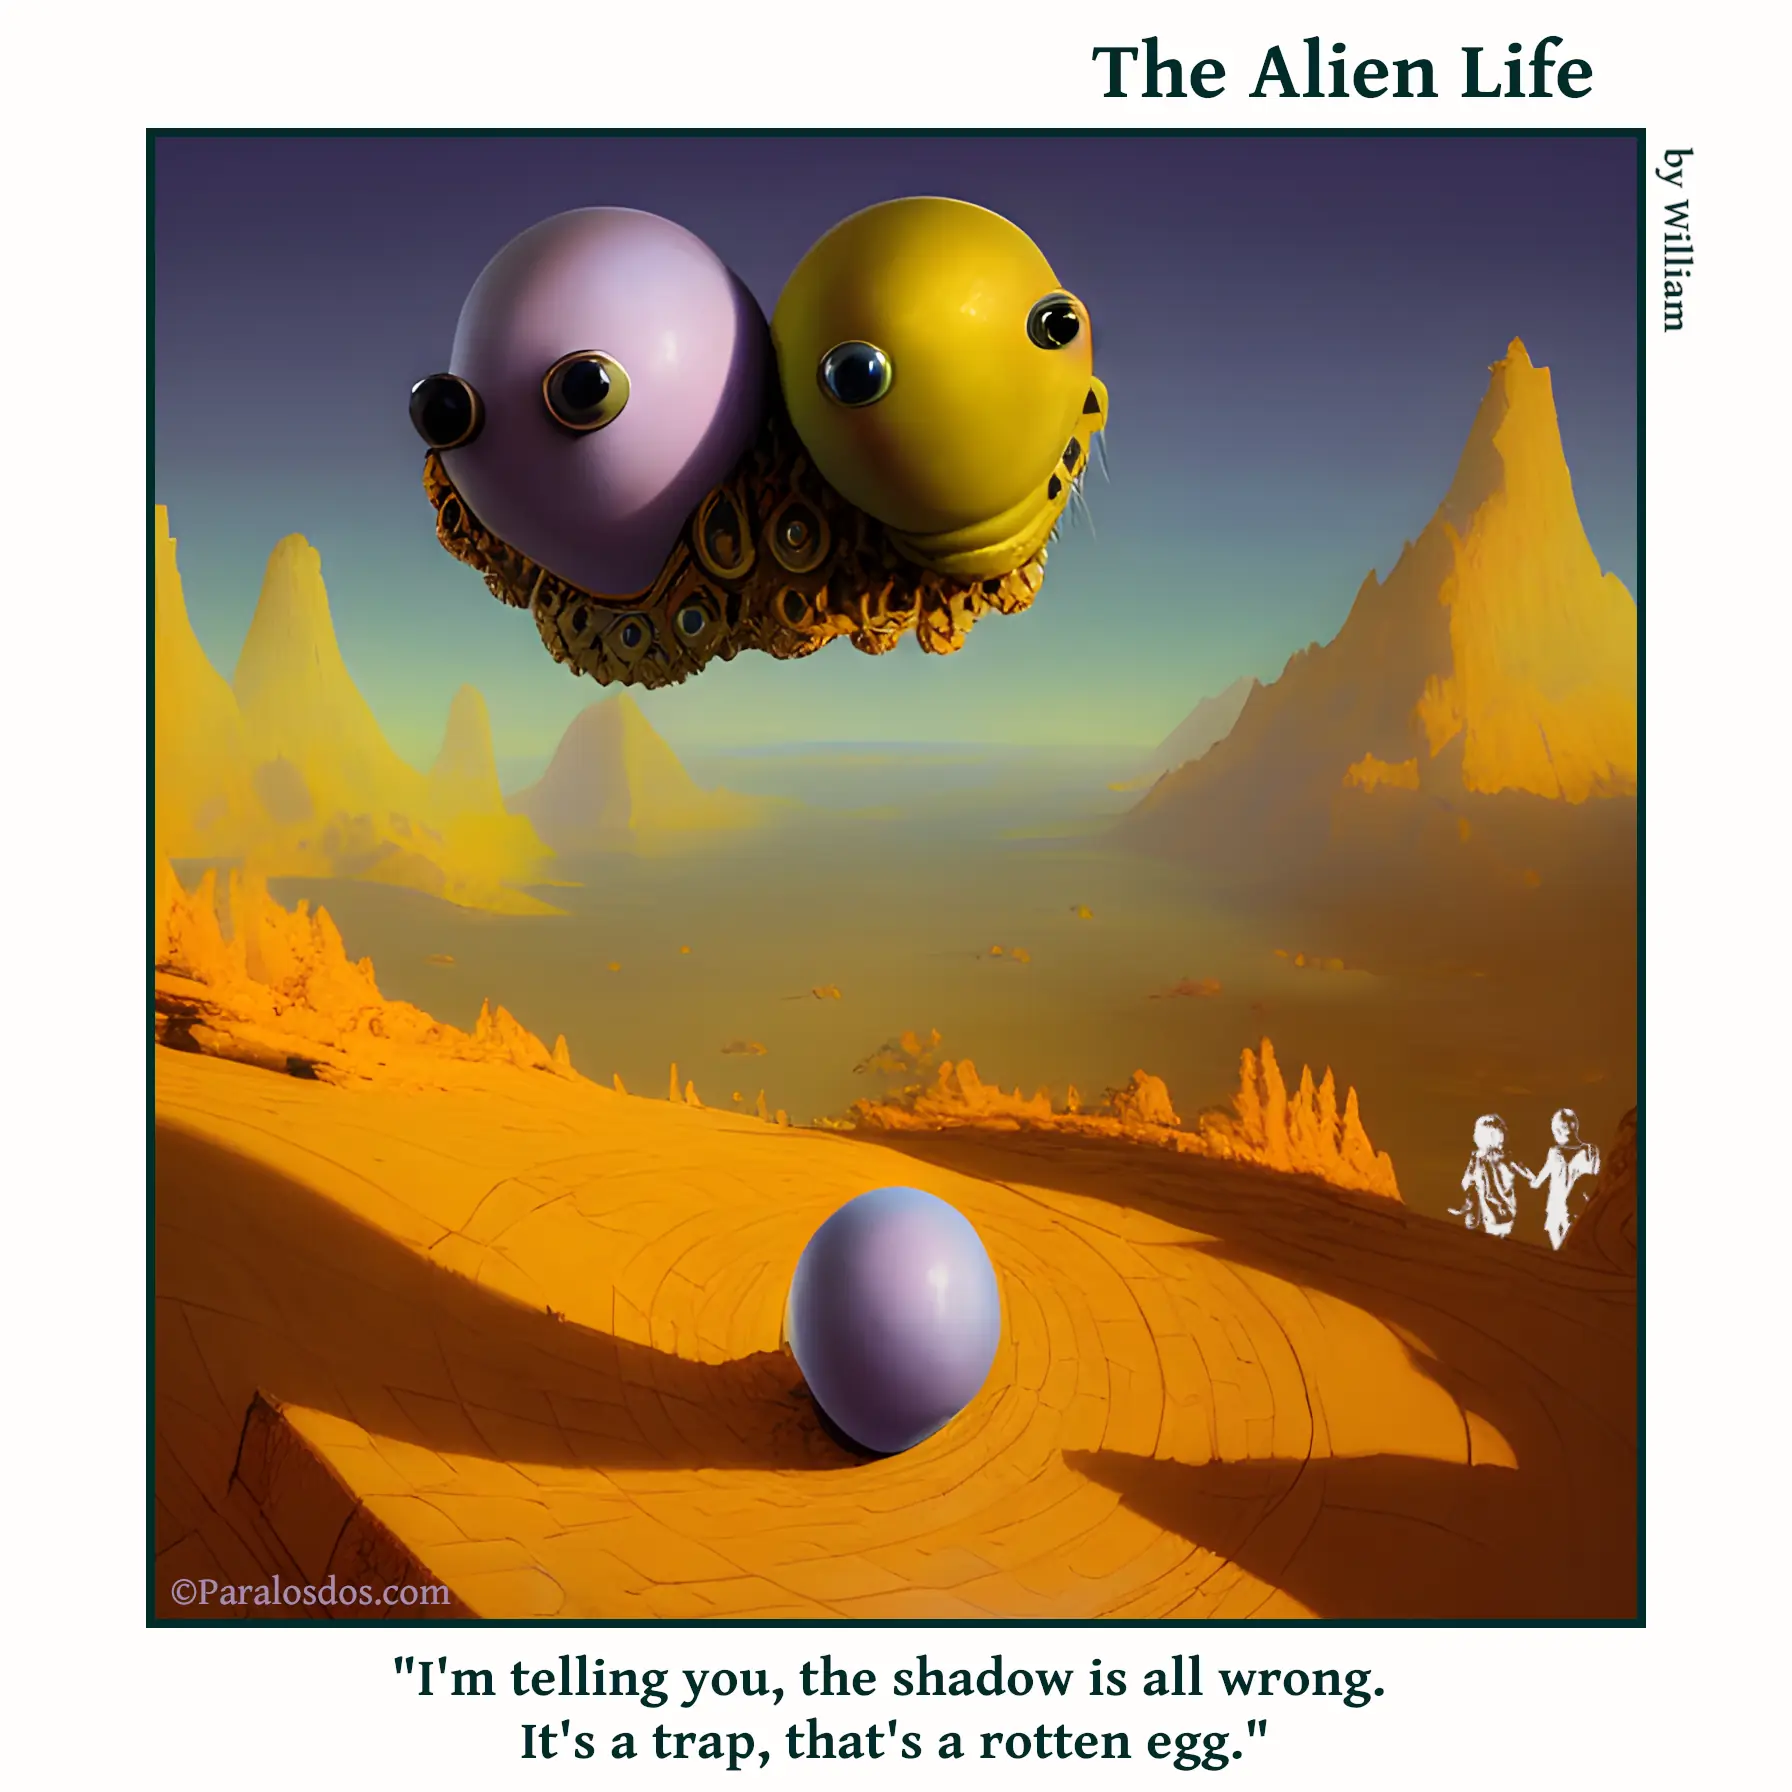 The Alien Life, one panel Comic. Two aliens that look like eggs are hovering in the air above an egg on the ground. The caption reads: "I'm telling you, the shadow is all wrong. It's a trap, that's a rotten egg."